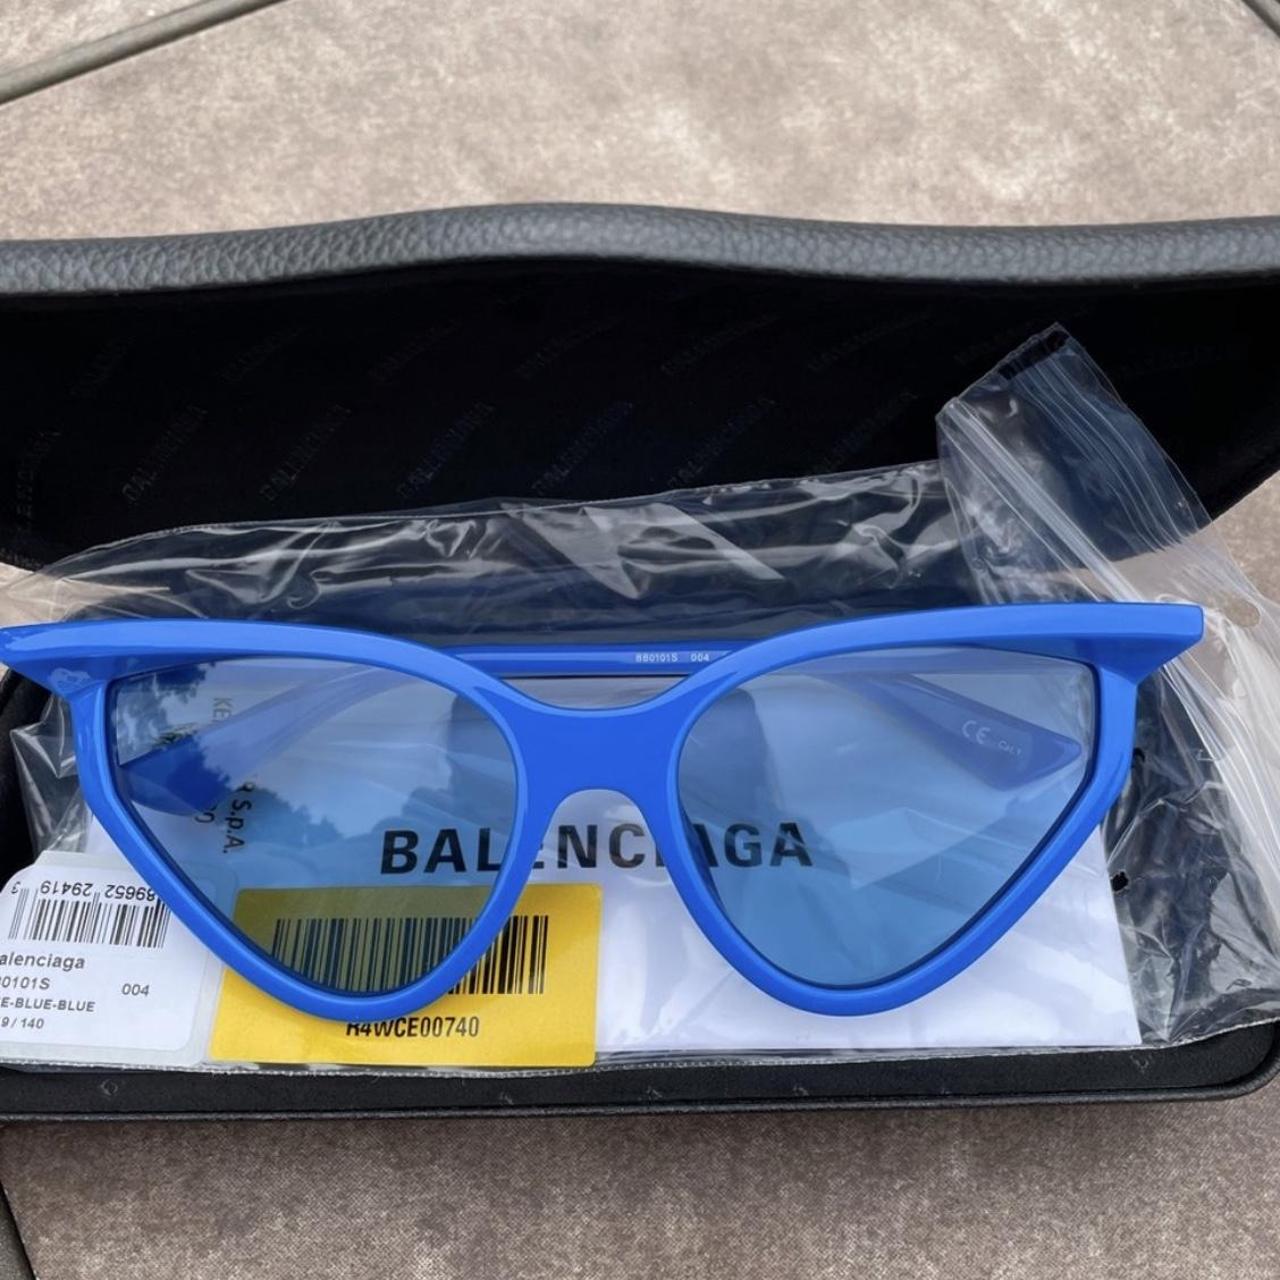 Product Image 3 - Balenciaga Sunglasses
New with tags 
Comes